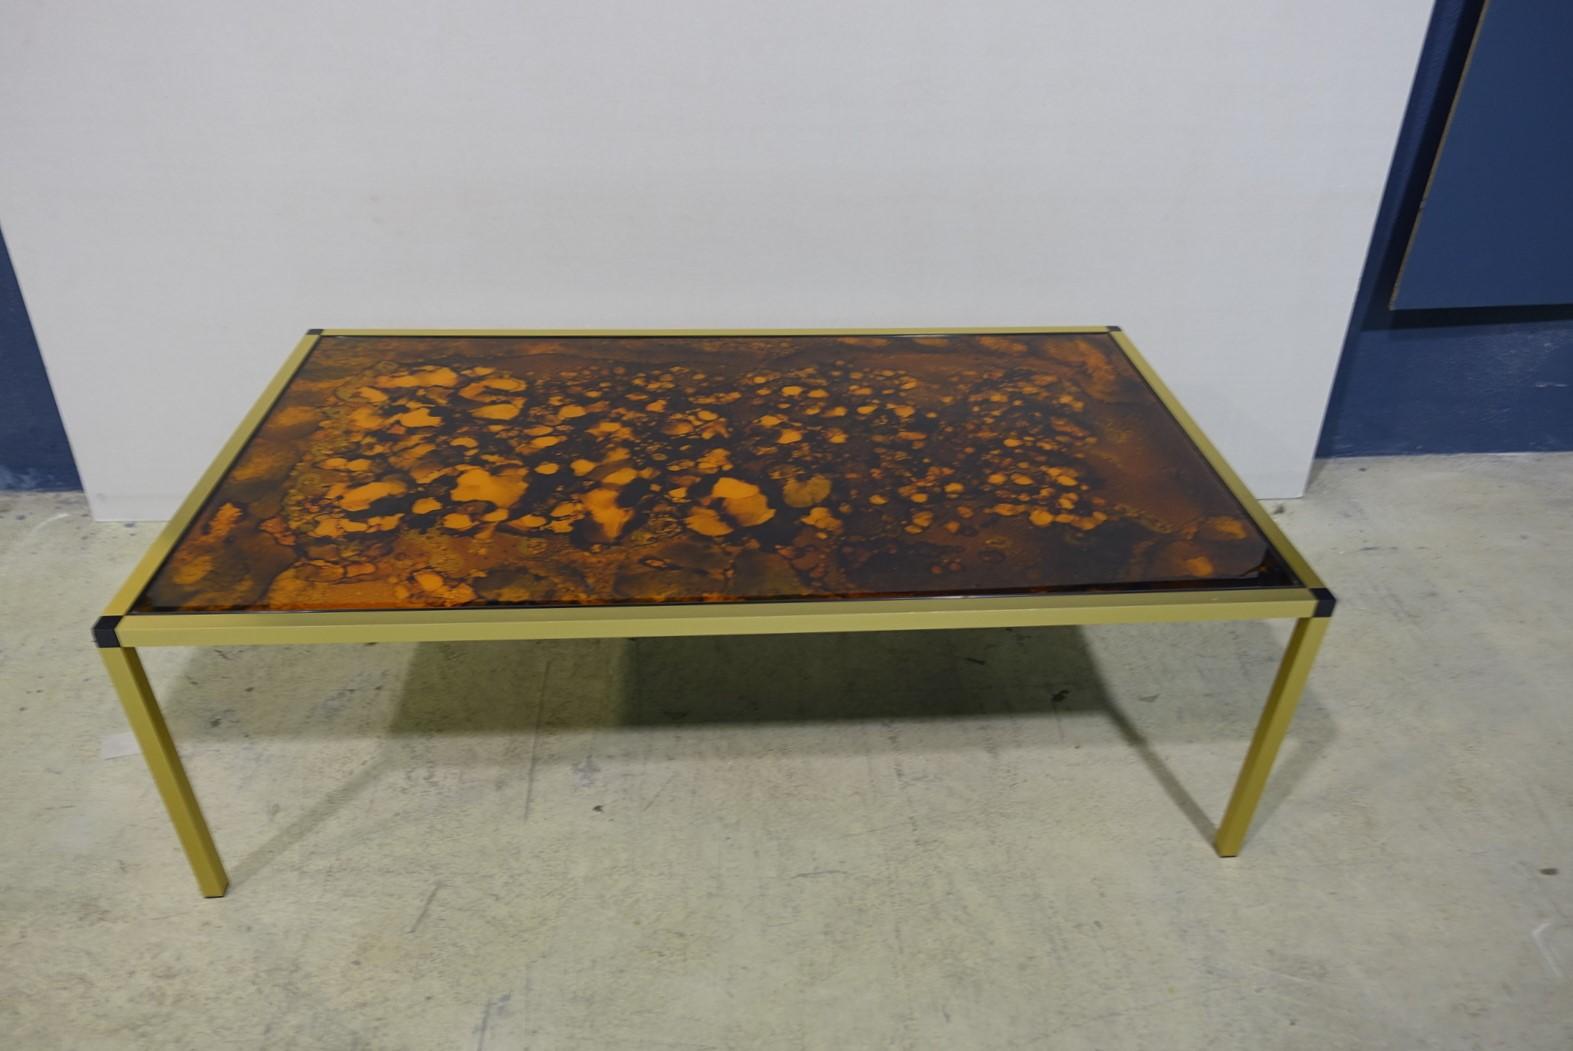 This Danish Lava pattern coffee table is made from gold aluminum with black feet and multicolored glass.